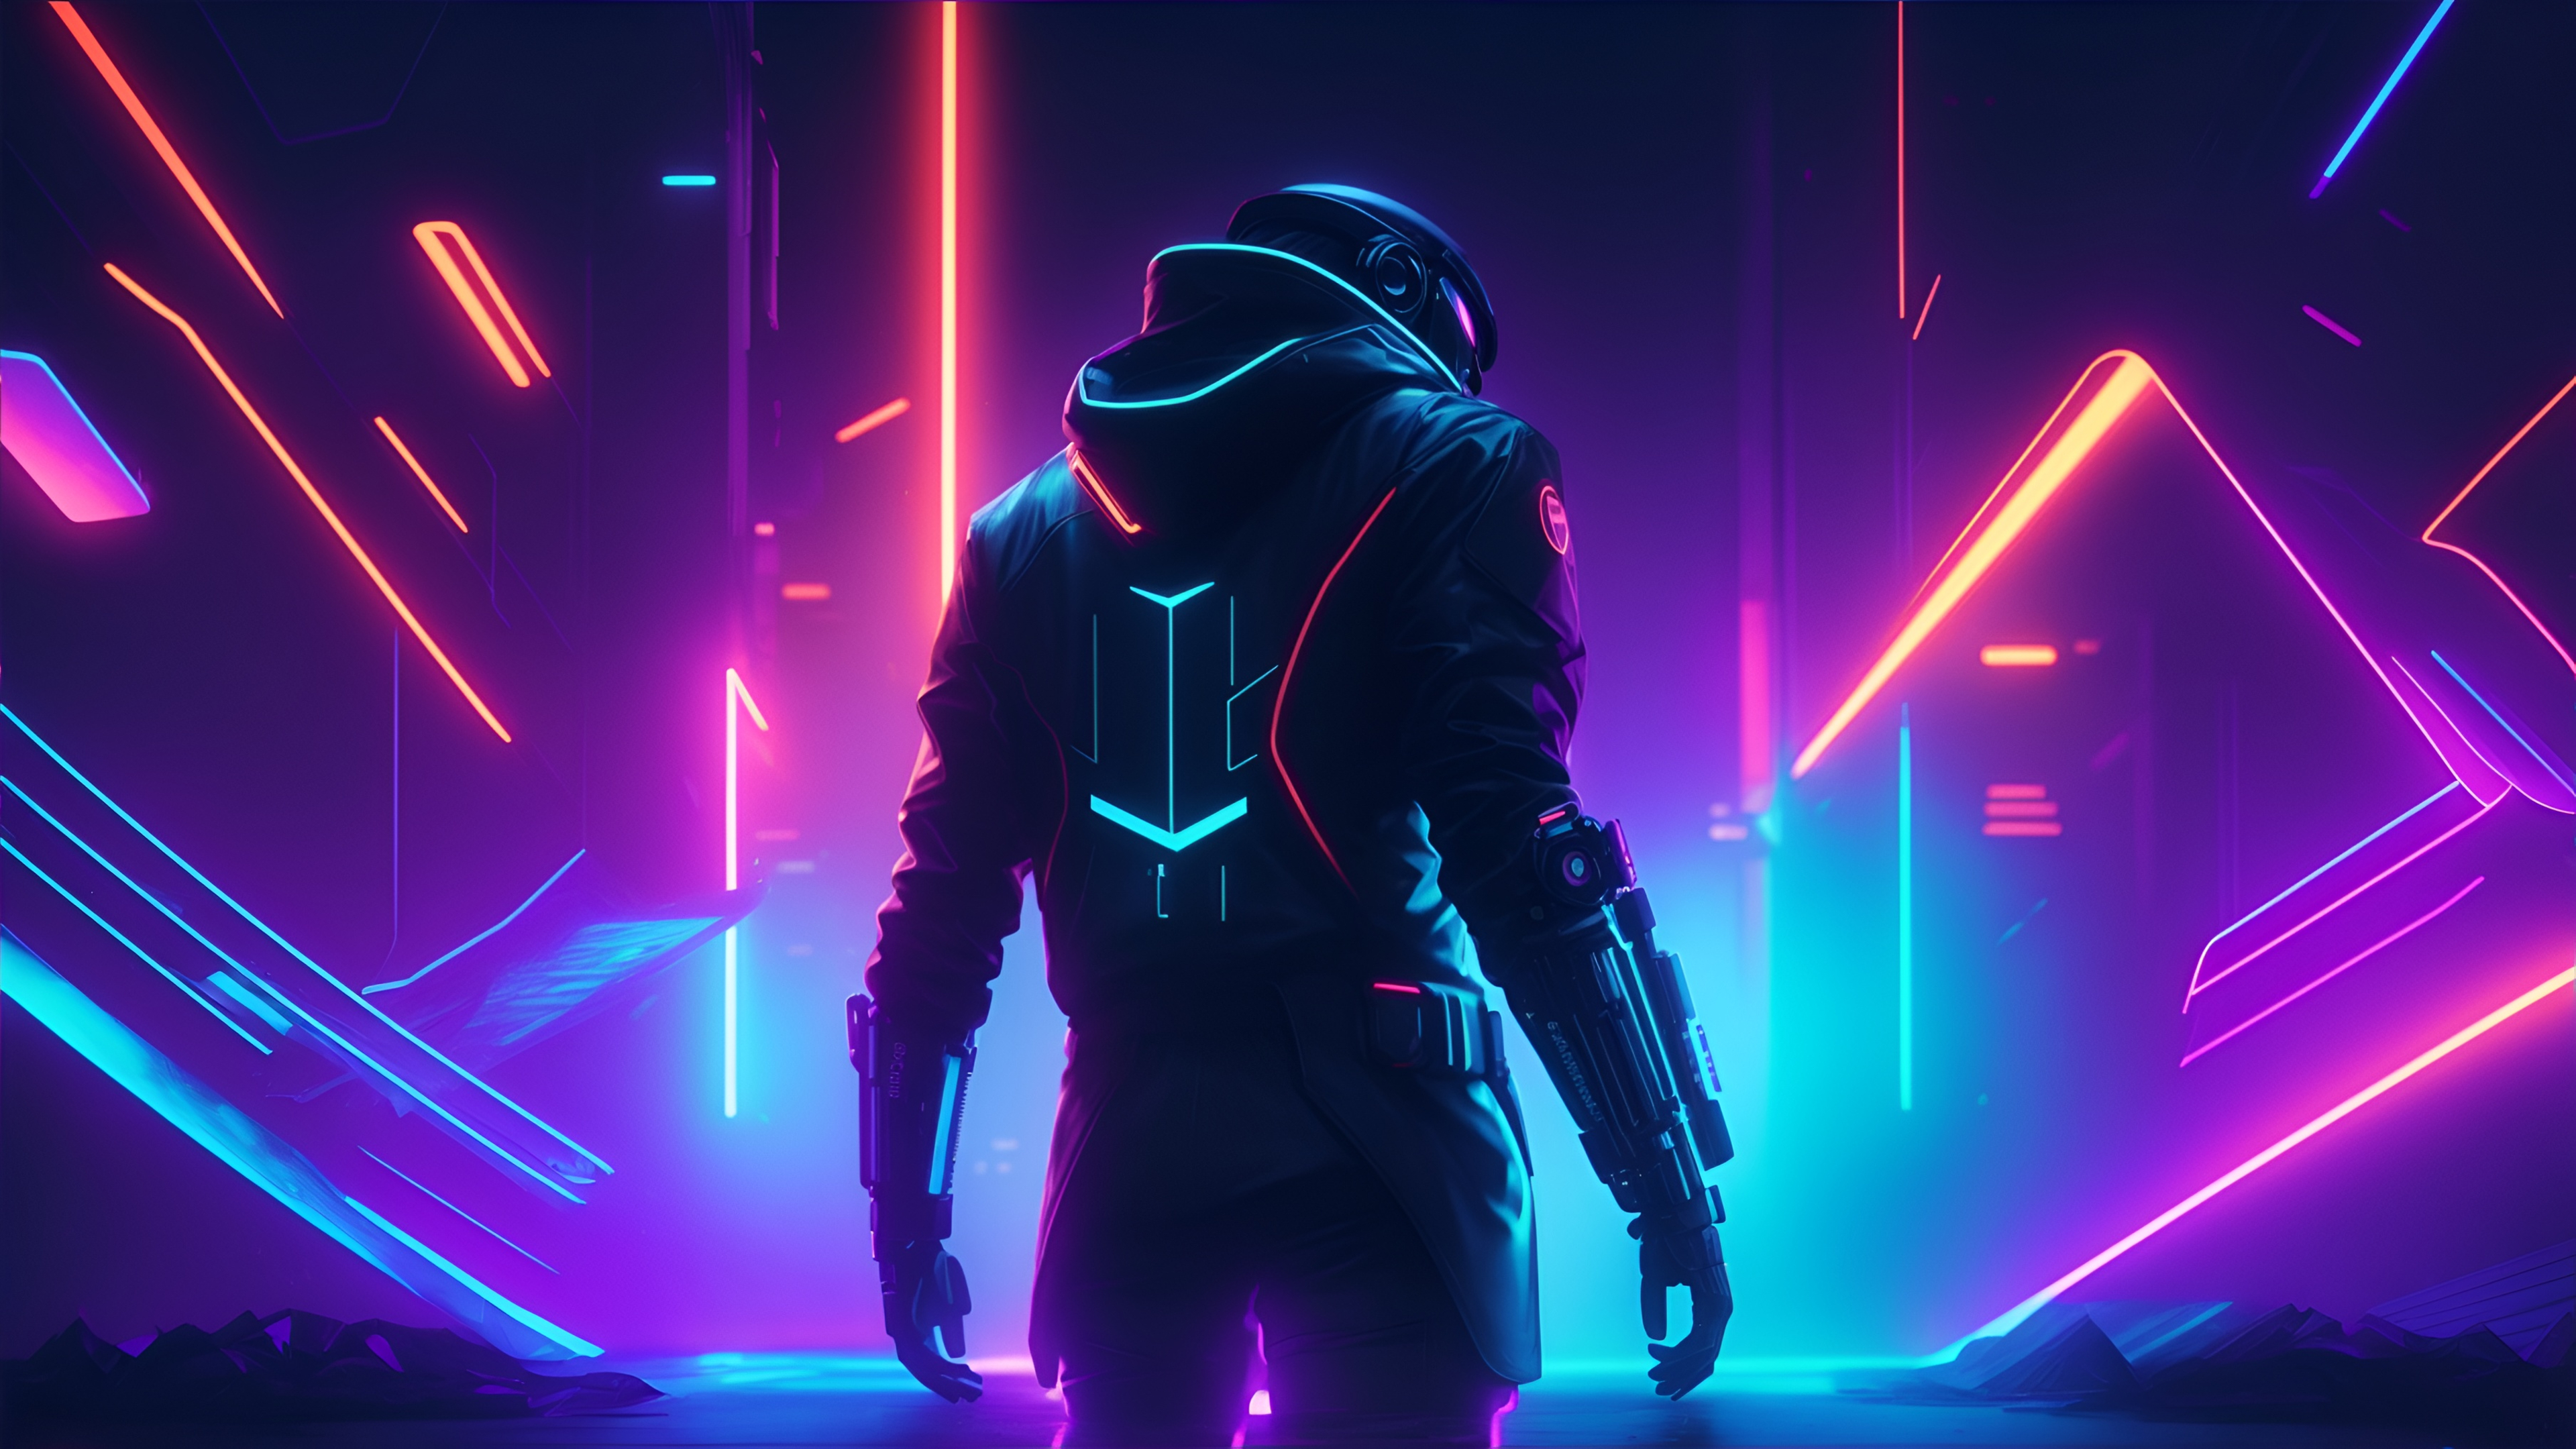 Cyberpunk Neon Android Wallpapers - Wallpaper Cave